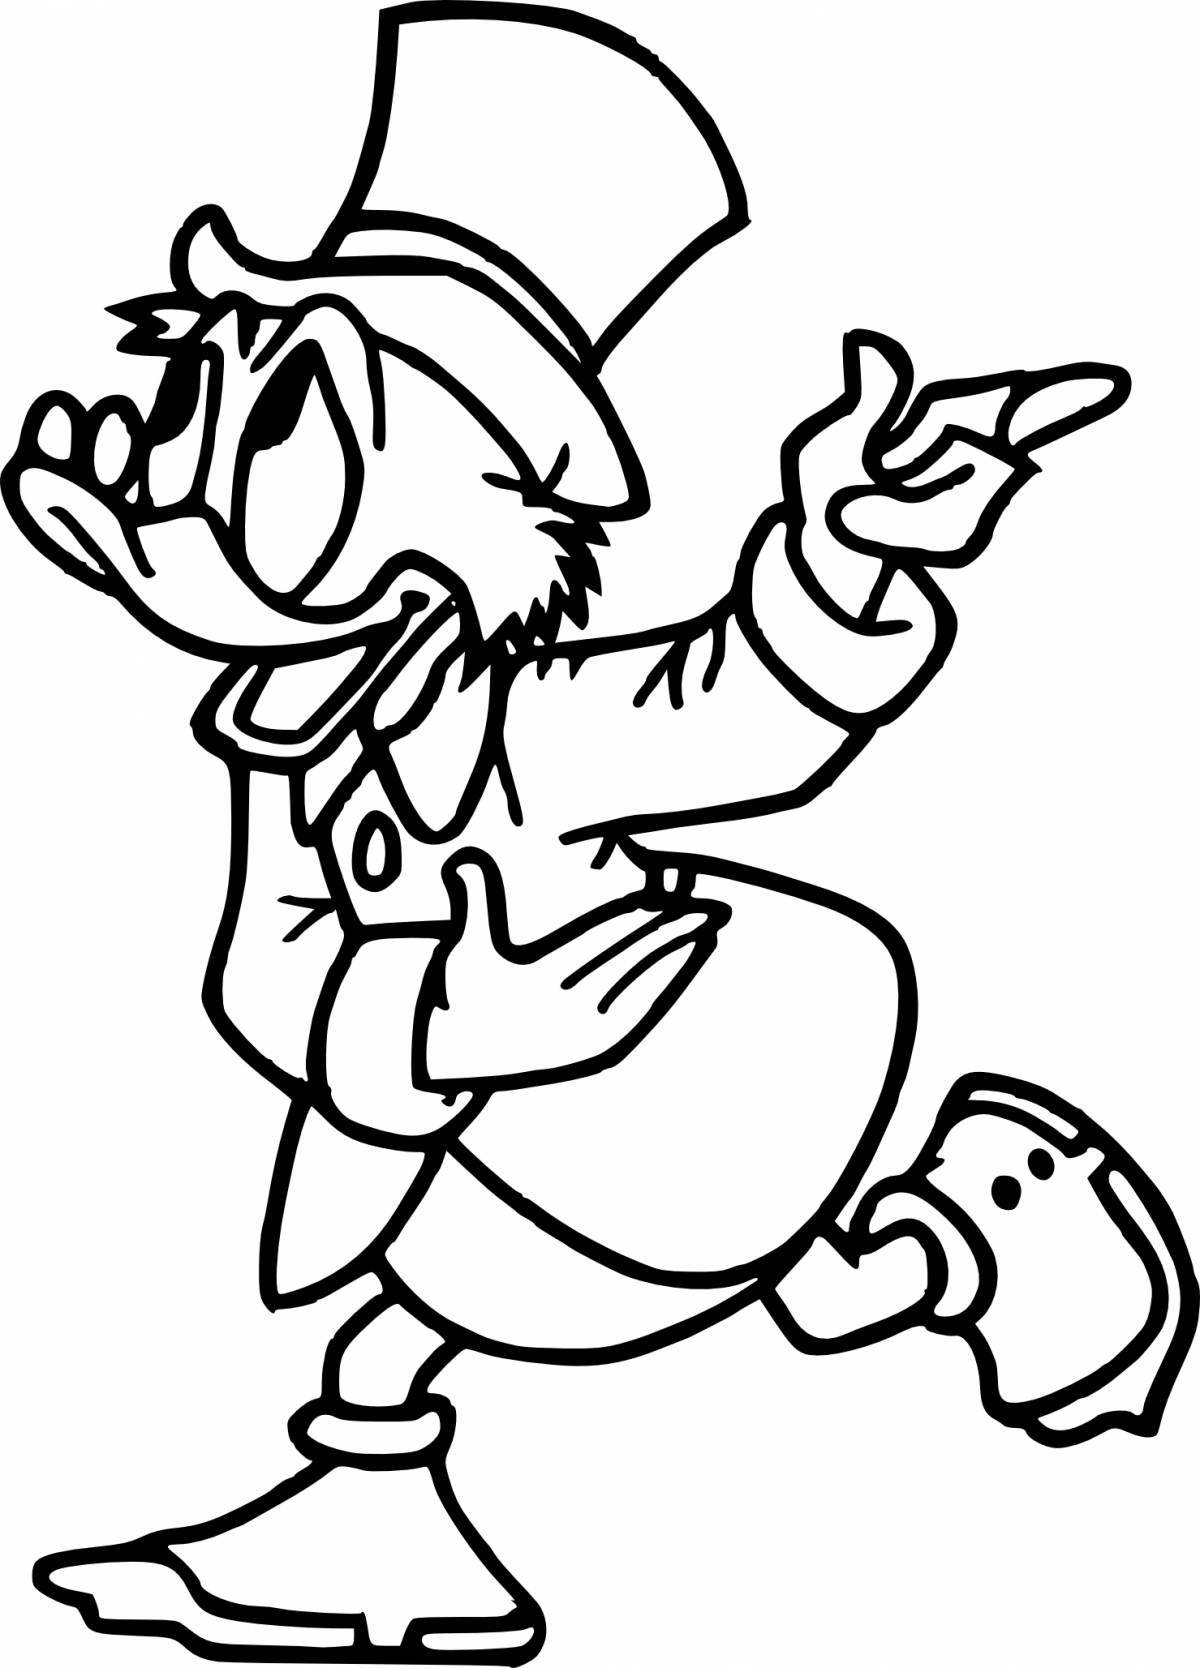 Coloring page funny scrooge mcduck